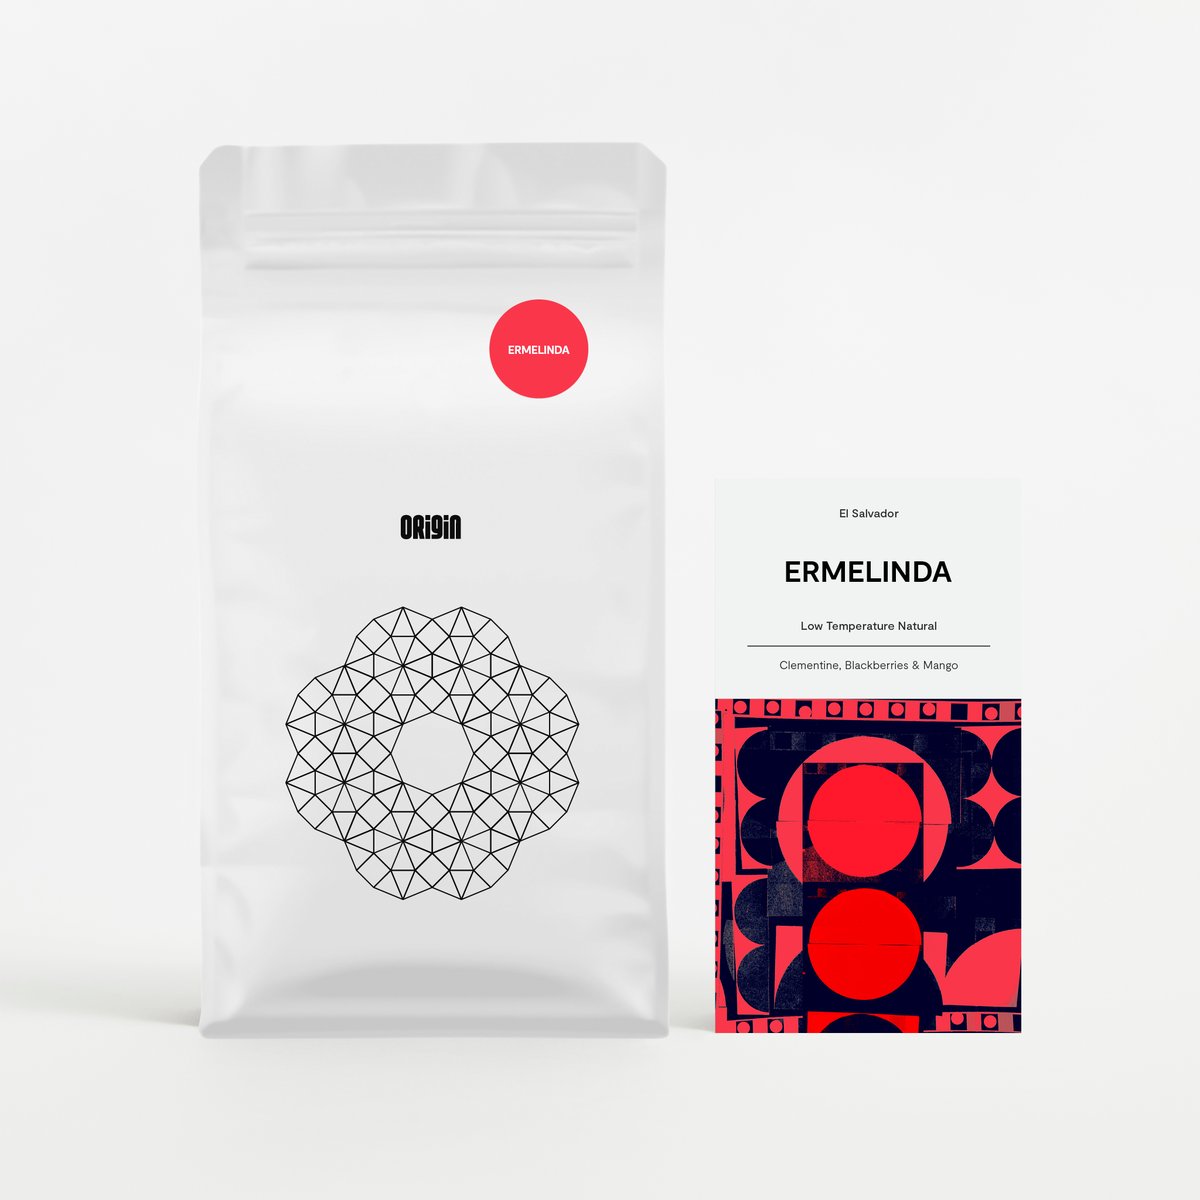 Named after the woman who cares for the plot, Ermelinda is loaded with sweet, fruit-forward notes. Clementine, blackberries, and mango present themselves in a refreshing cup layered with beautiful citrus acidity—the perfect morning espresso > bit.ly/40Z0SrV